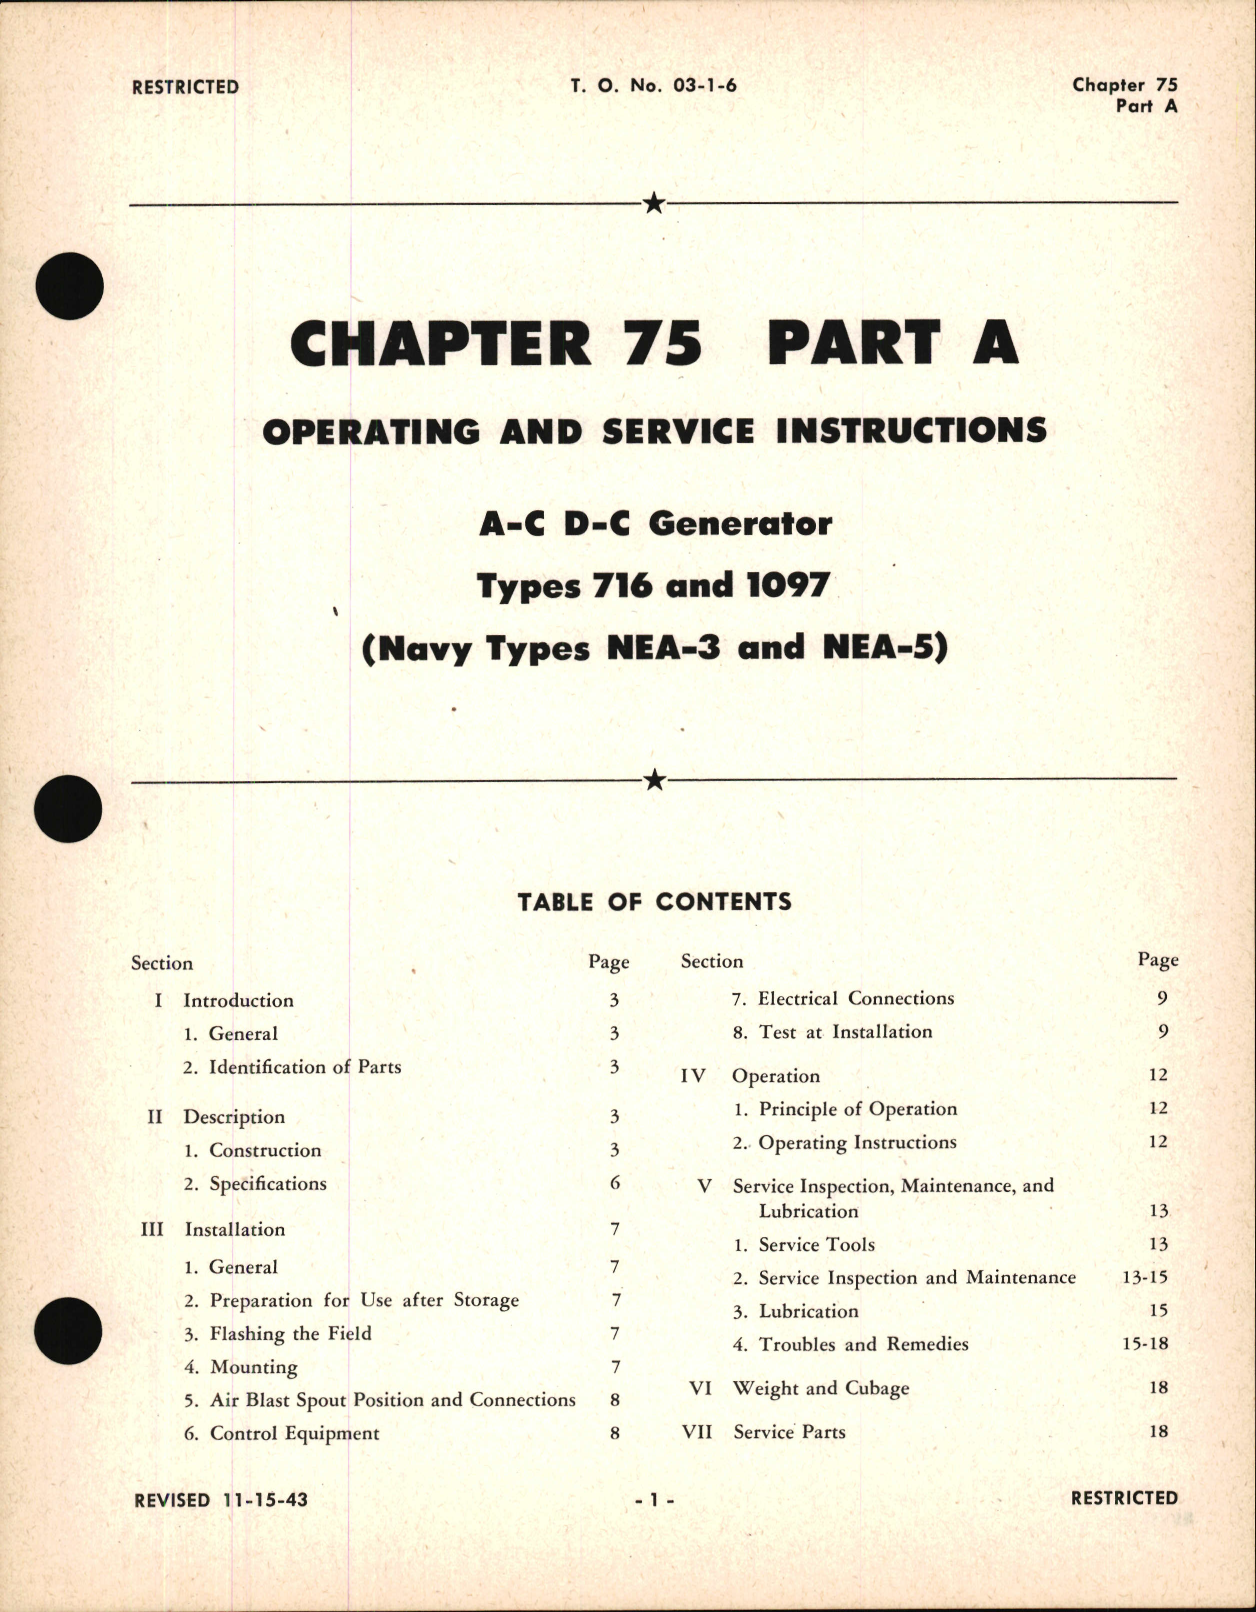 Sample page 1 from AirCorps Library document: Operating and Service Instructions for A-C D-C Generator, Ch 75 Part A